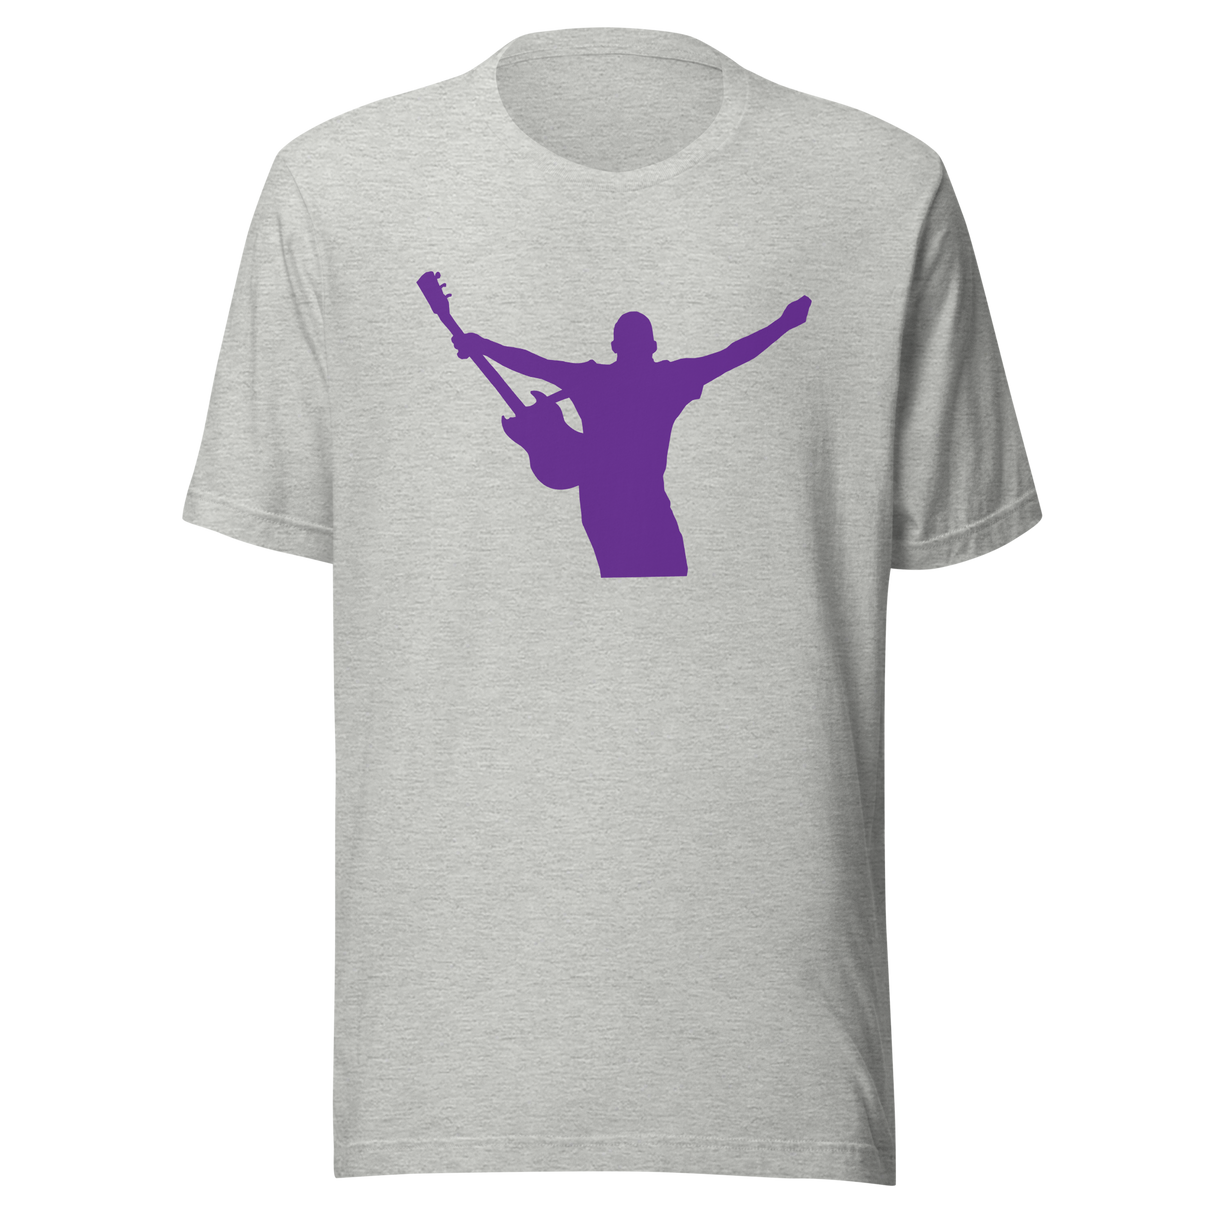 rockstar-with-one-arm-up-holding-a-guitar-music-tee-rockstar-t-shirt-guitar-tee-silhouette-t-shirt-purple-tee#color_athletic-heather